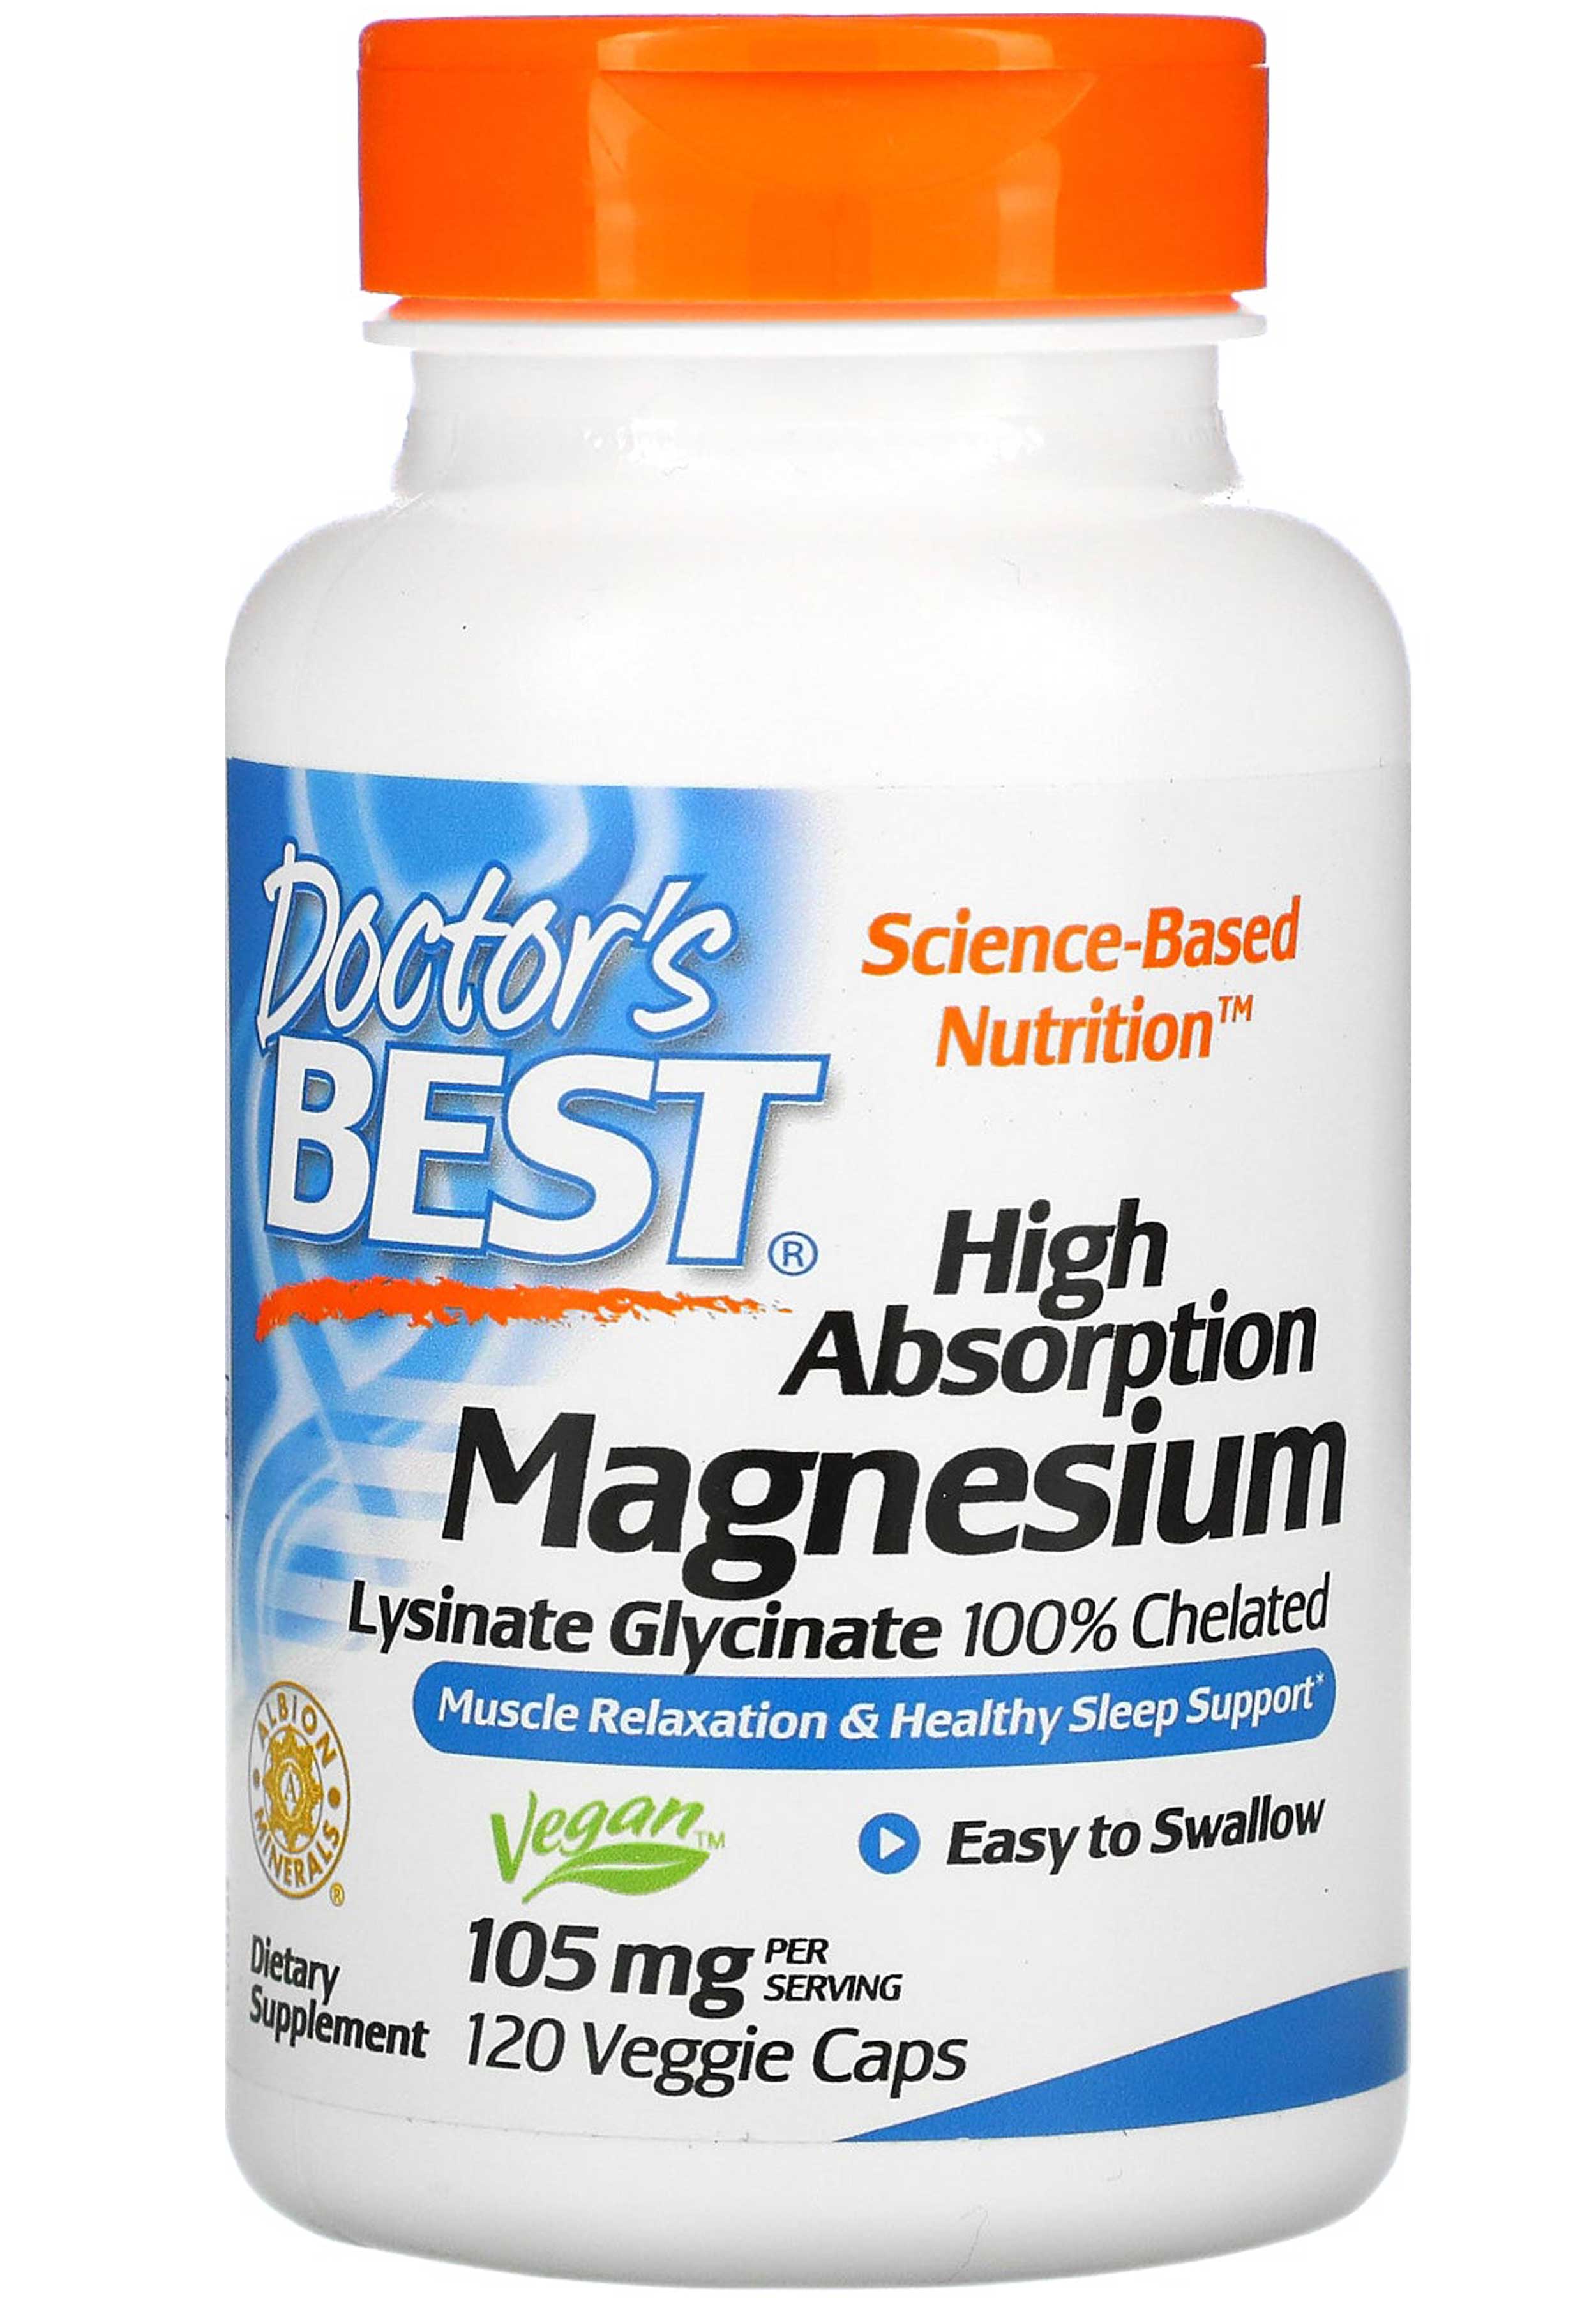 Doctor's Best High Absorption Magnesium Lysinate Glycinate 100% Chelated